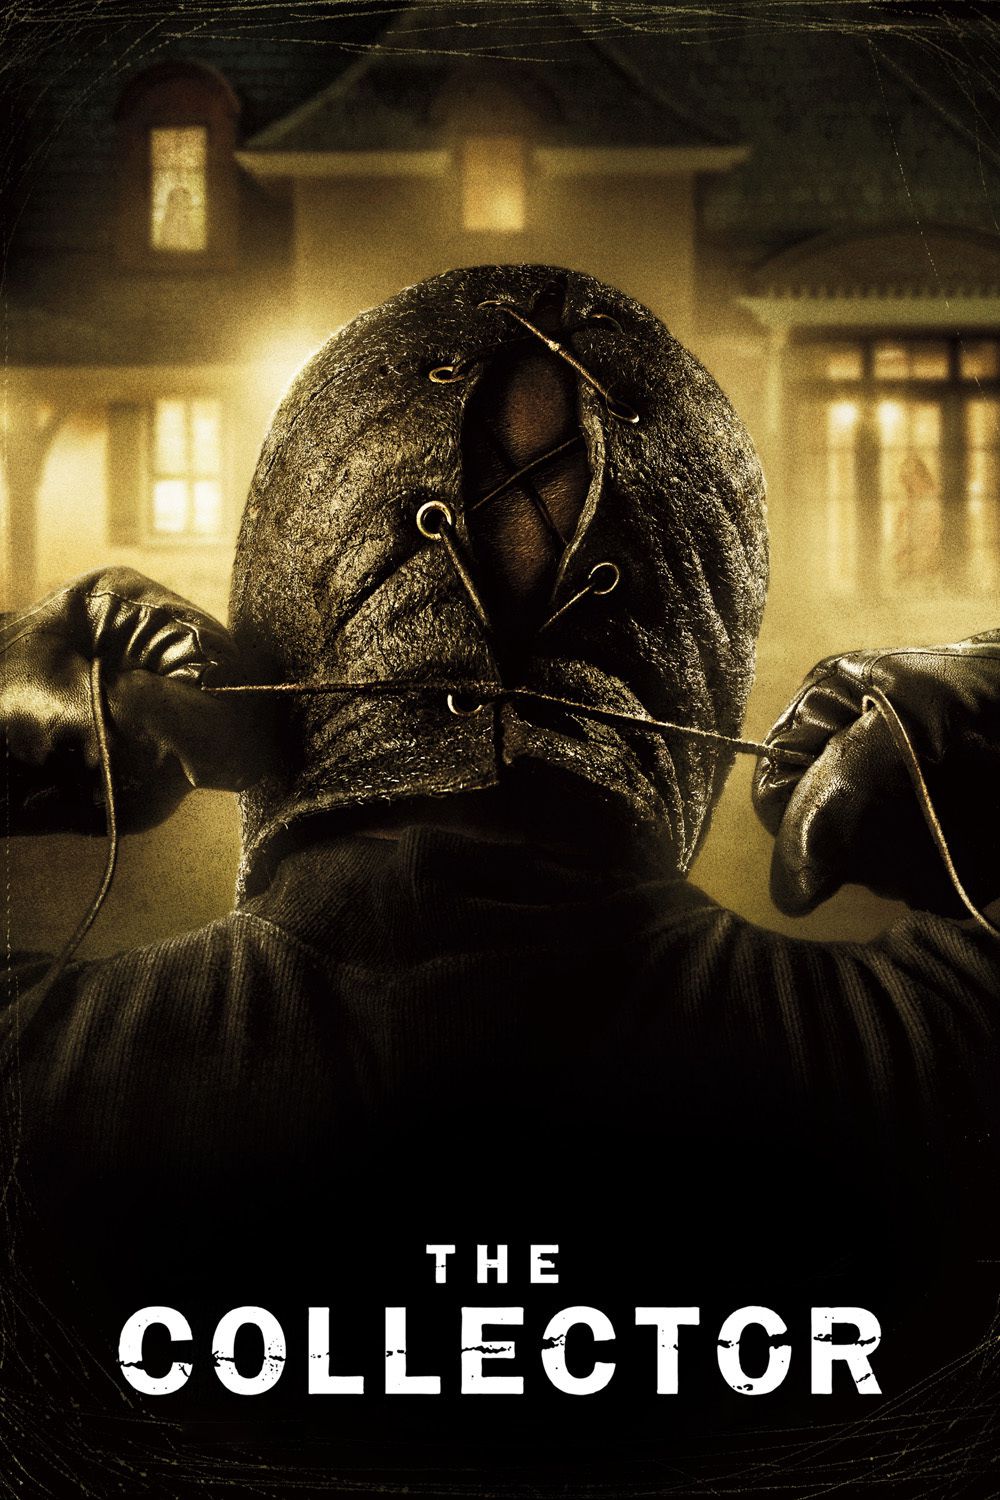 The Collector - Film (2009) streaming VF gratuit complet